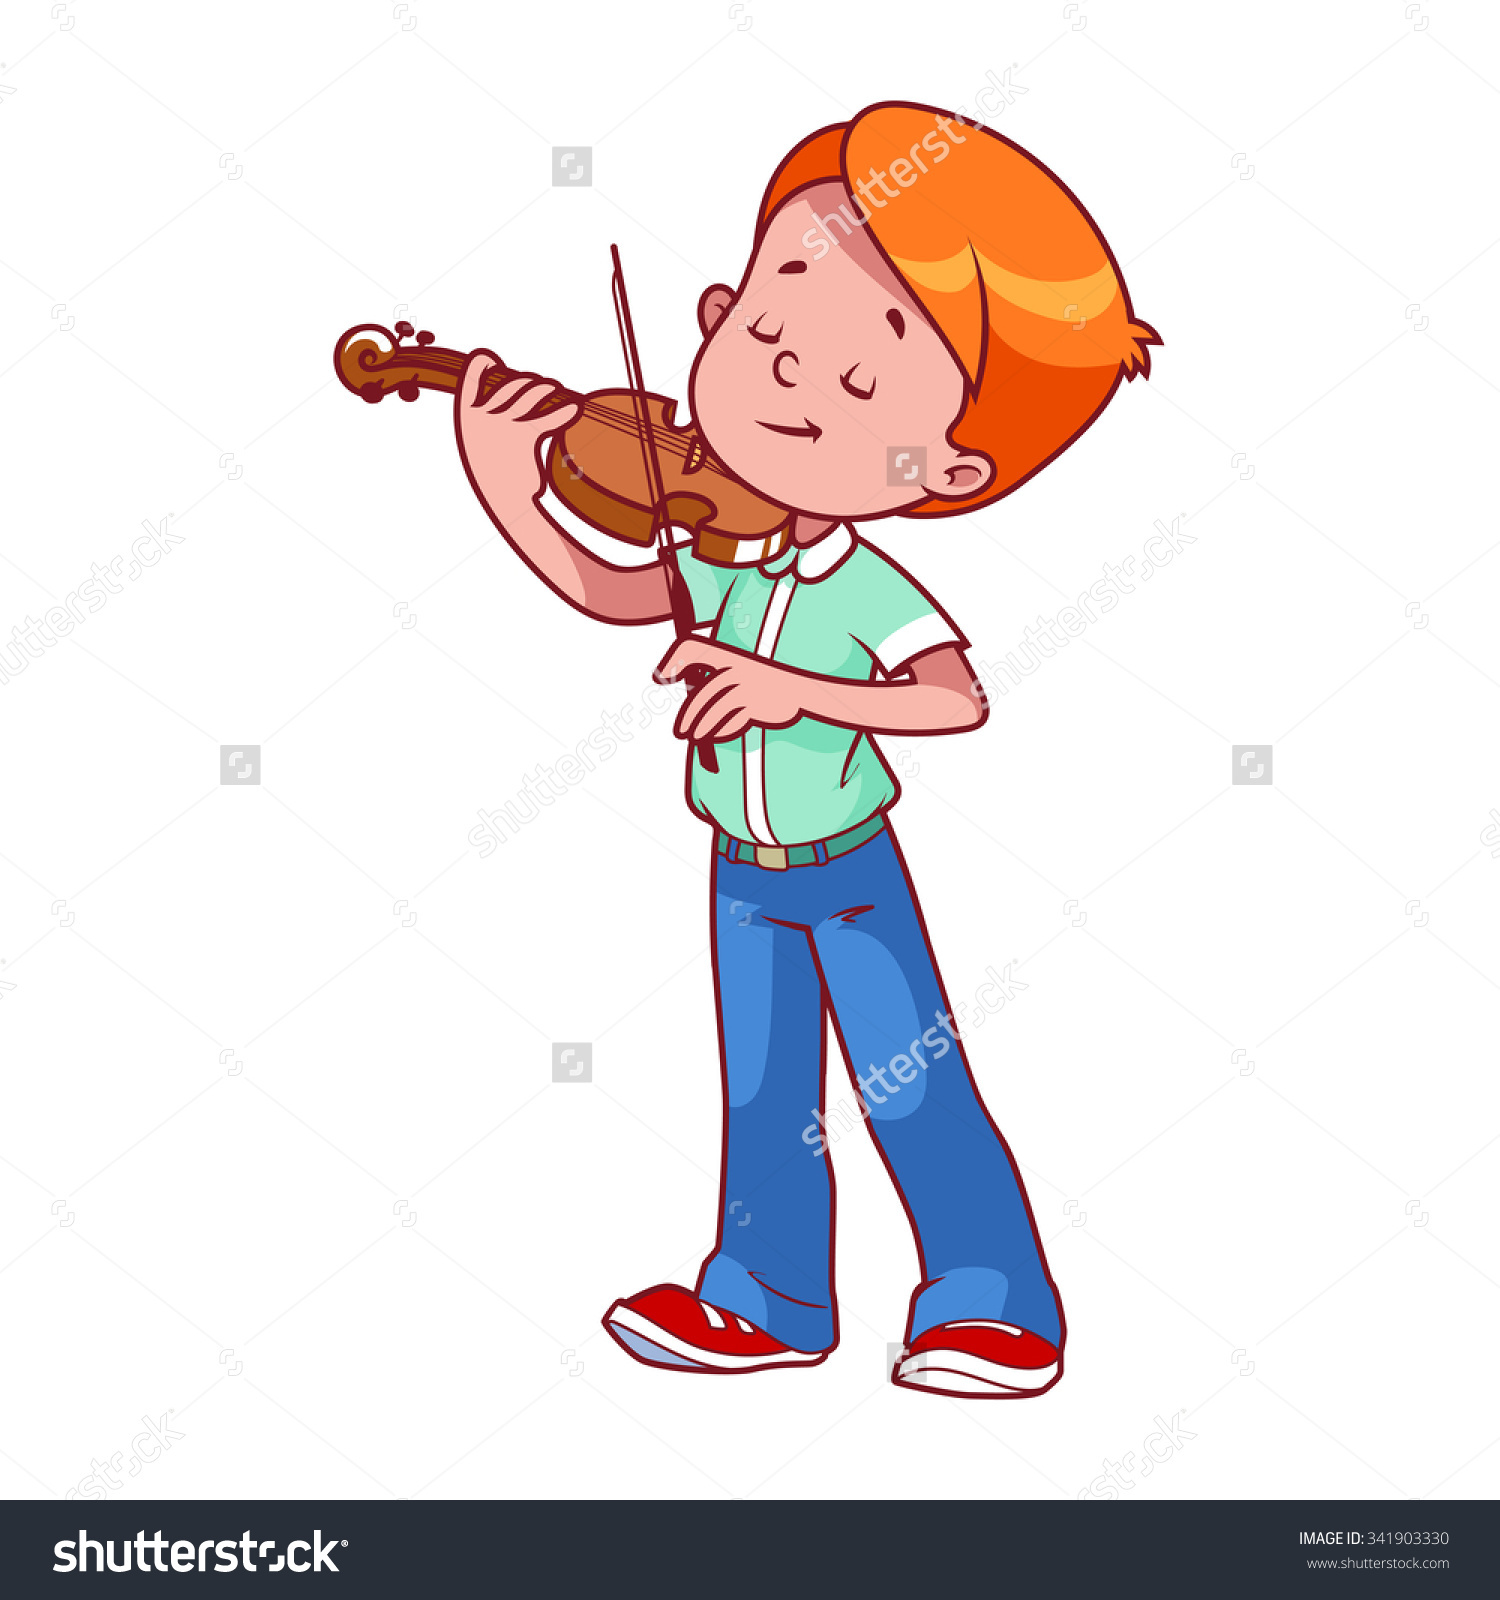 Violinist clipart #4, Download drawings